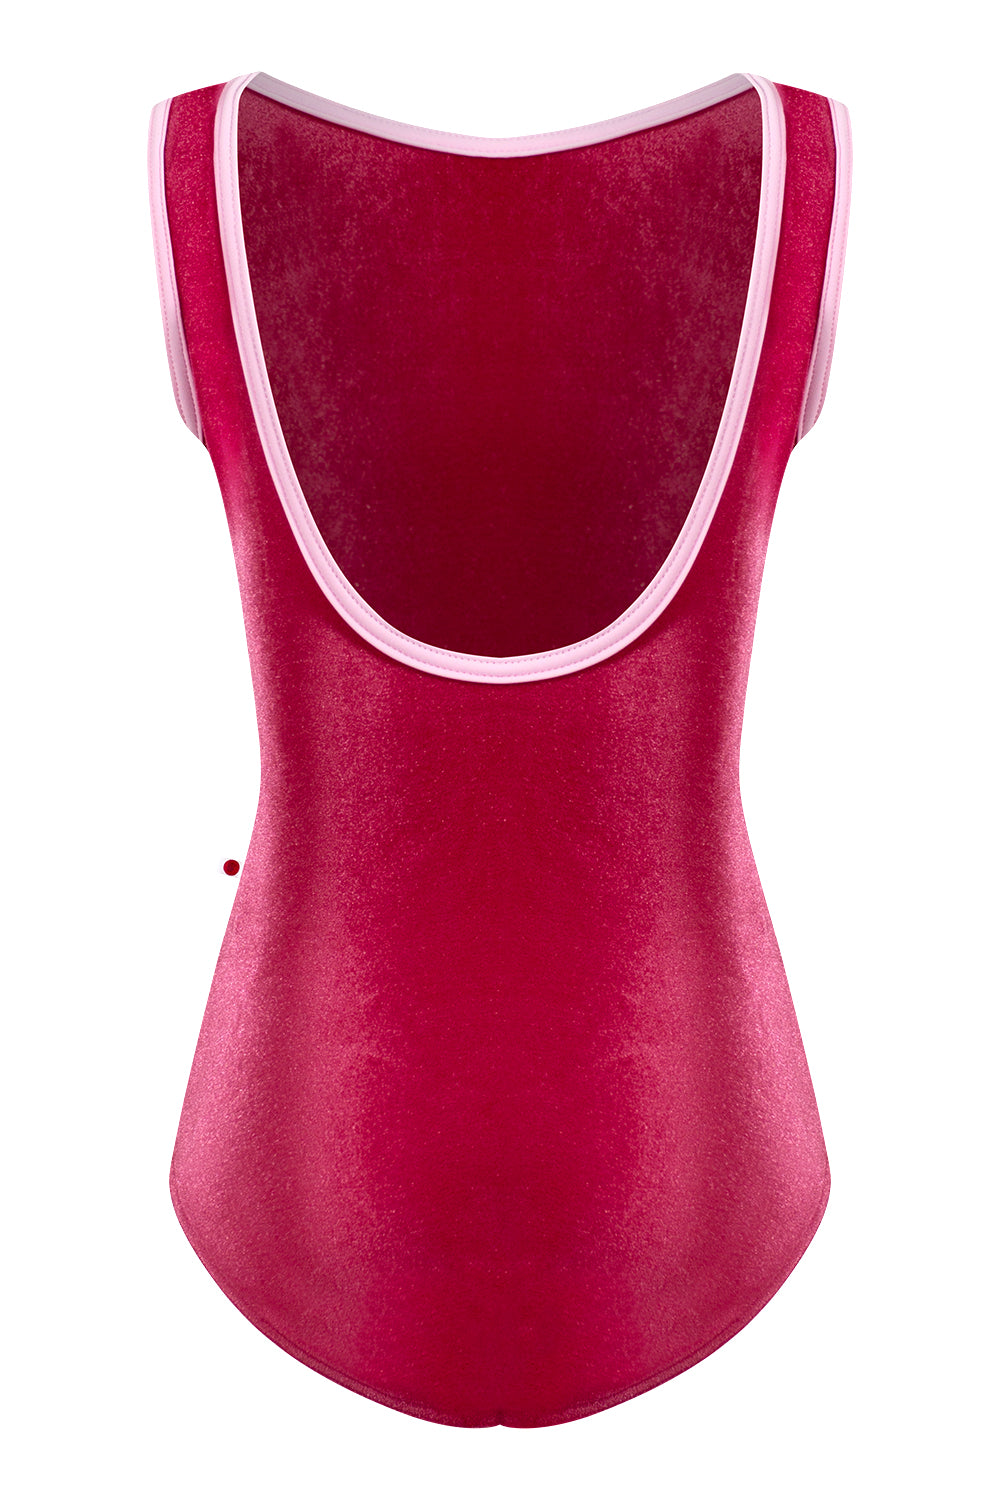 Kids Sofiane leotard in V-Peony body color with T-Rose trim color